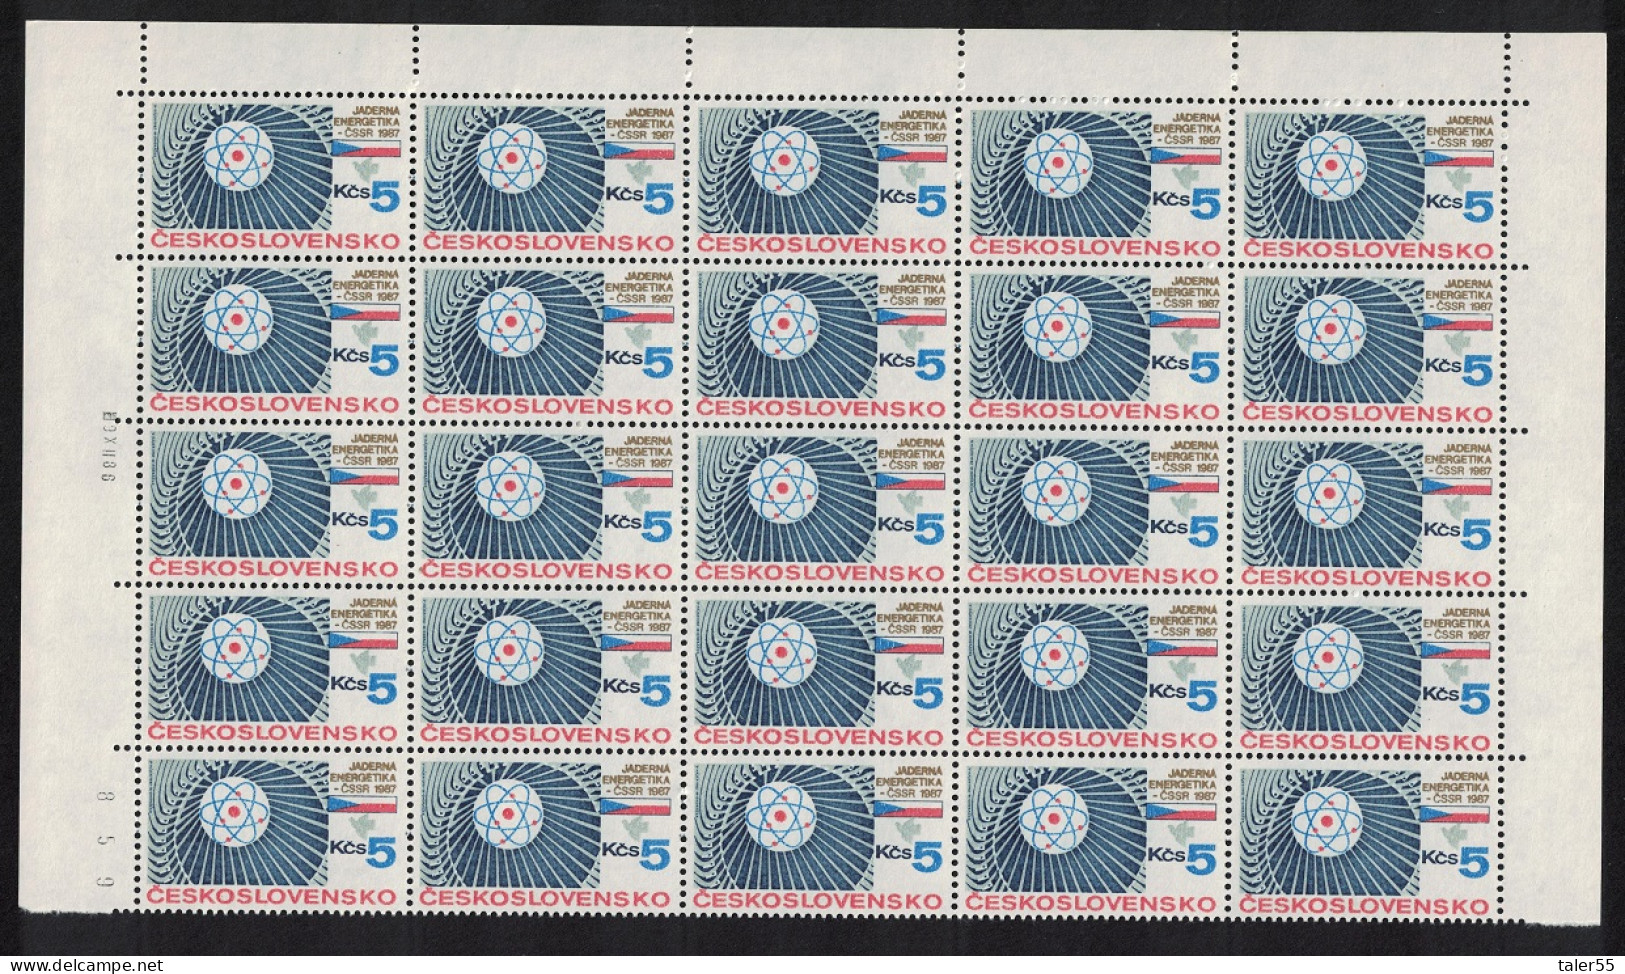 Czechoslovakia Nuclear Power Industry Half Sheet 1987 MNH SG#2875 - Unused Stamps